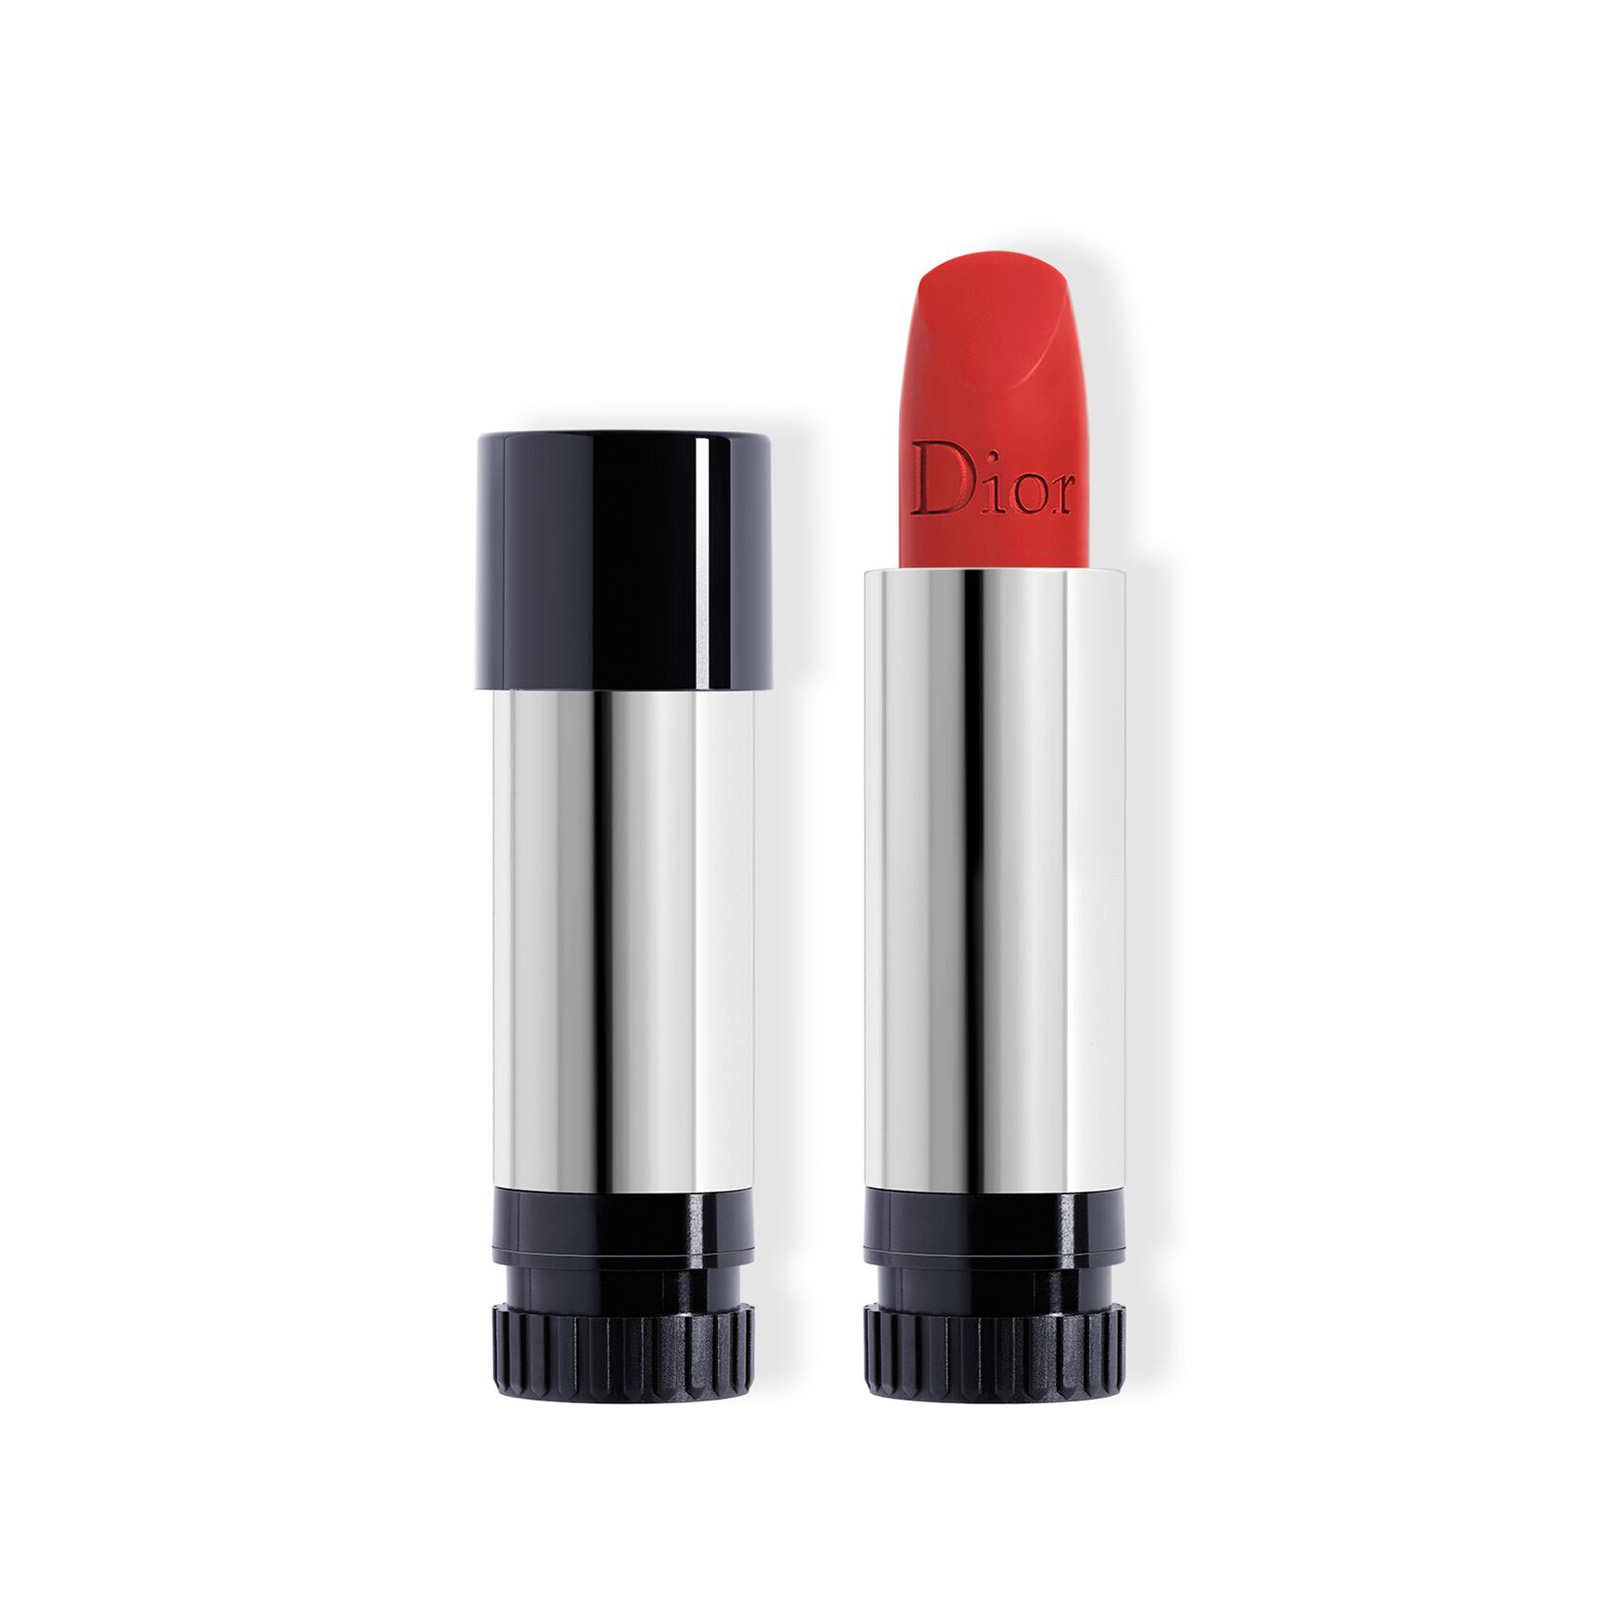 Dior Rouge Dior Couture Colour Lipstick Refill 3.5G 888 Strong Red Matte Finish